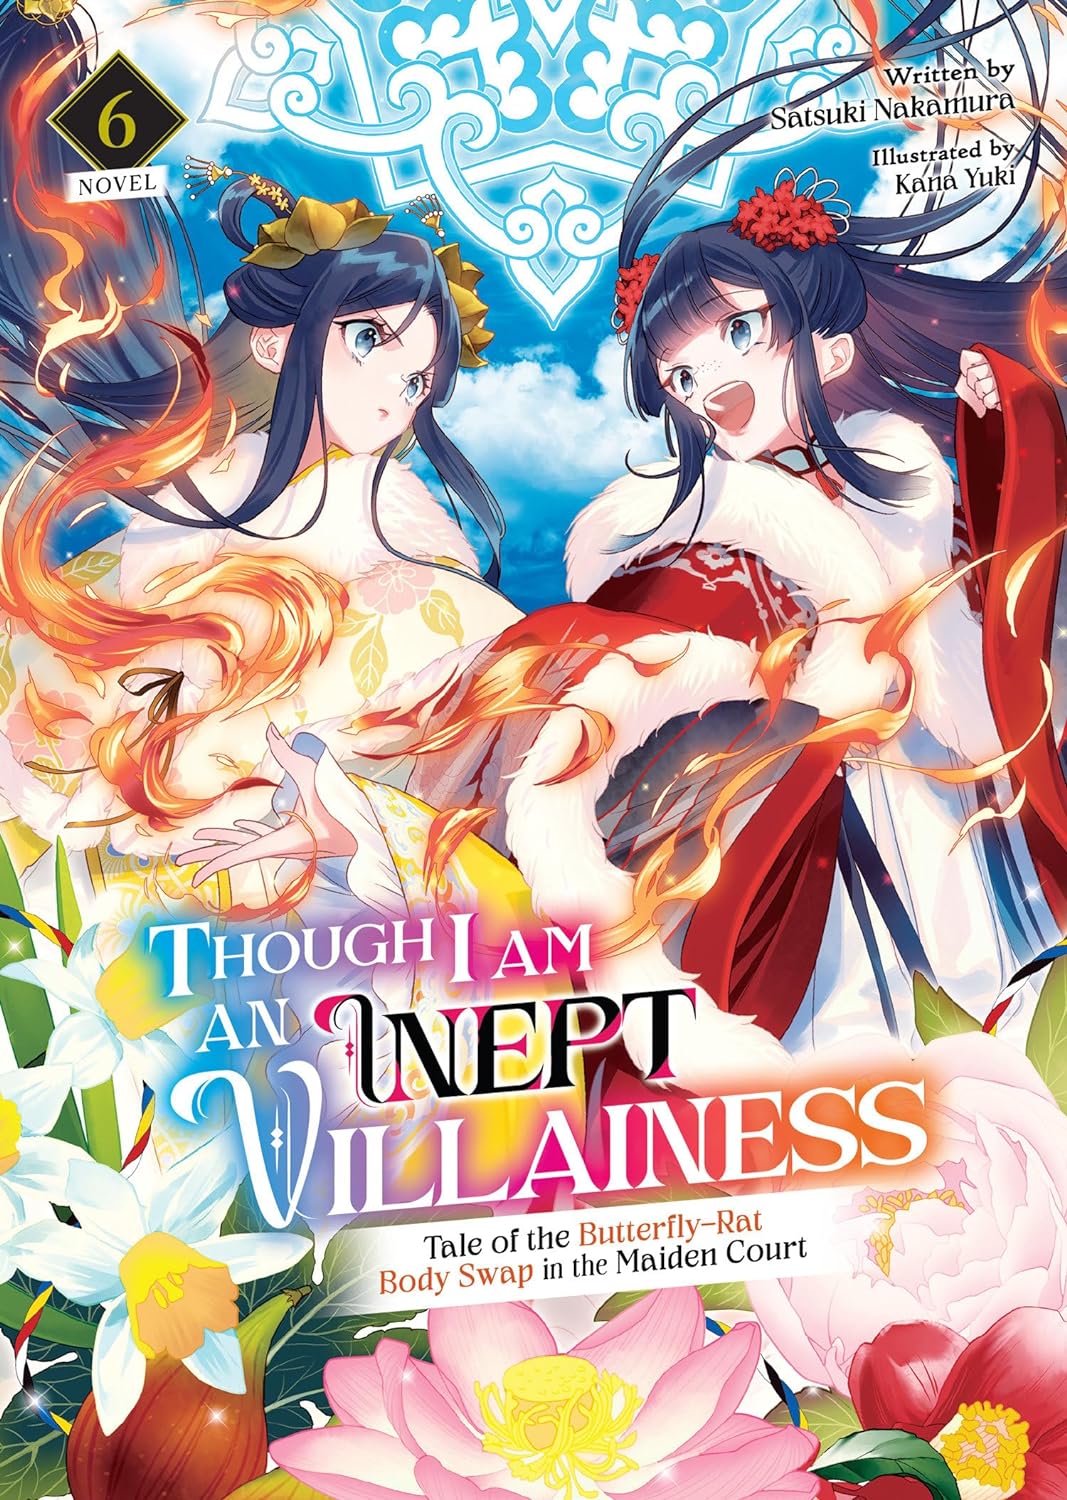 Though I Am an Inept Villainess: Tale of the Butterfly-Rat Body Swap in the Maiden Court (Light Novel) Vol. 05